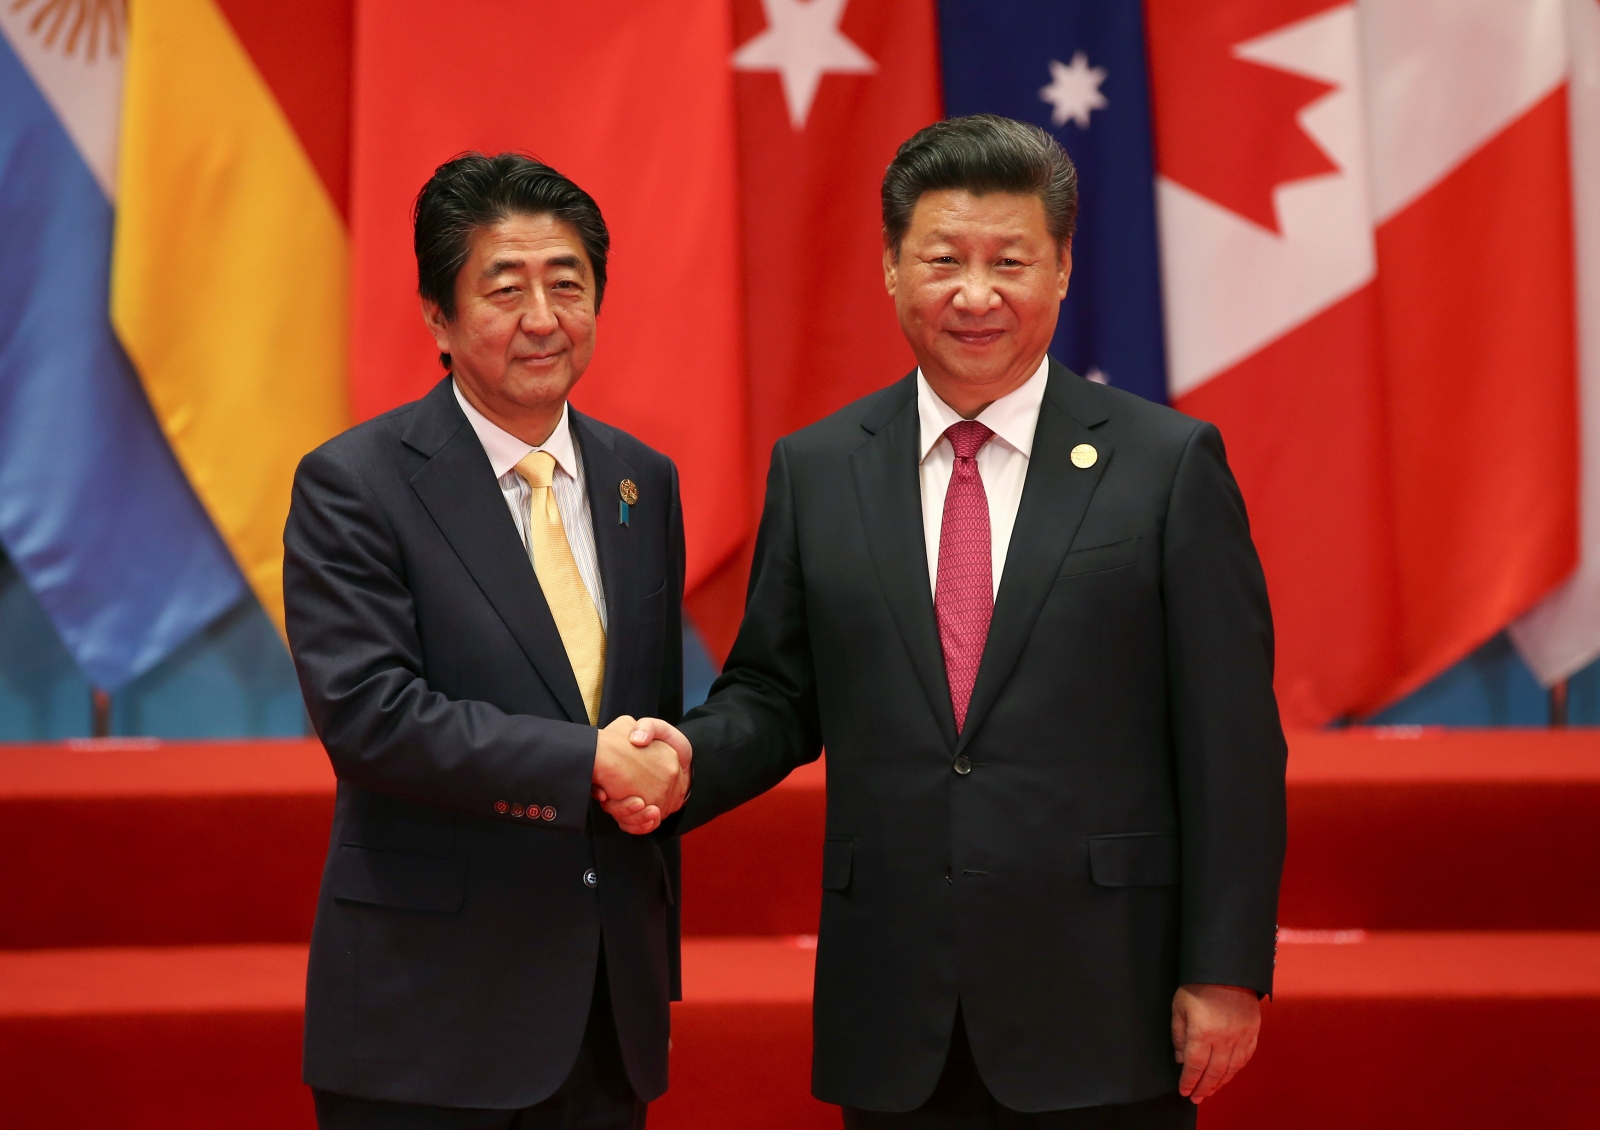 China's Xi Jinping and Japan's Shinzo Abe hold bilateral talks over maritime disputes